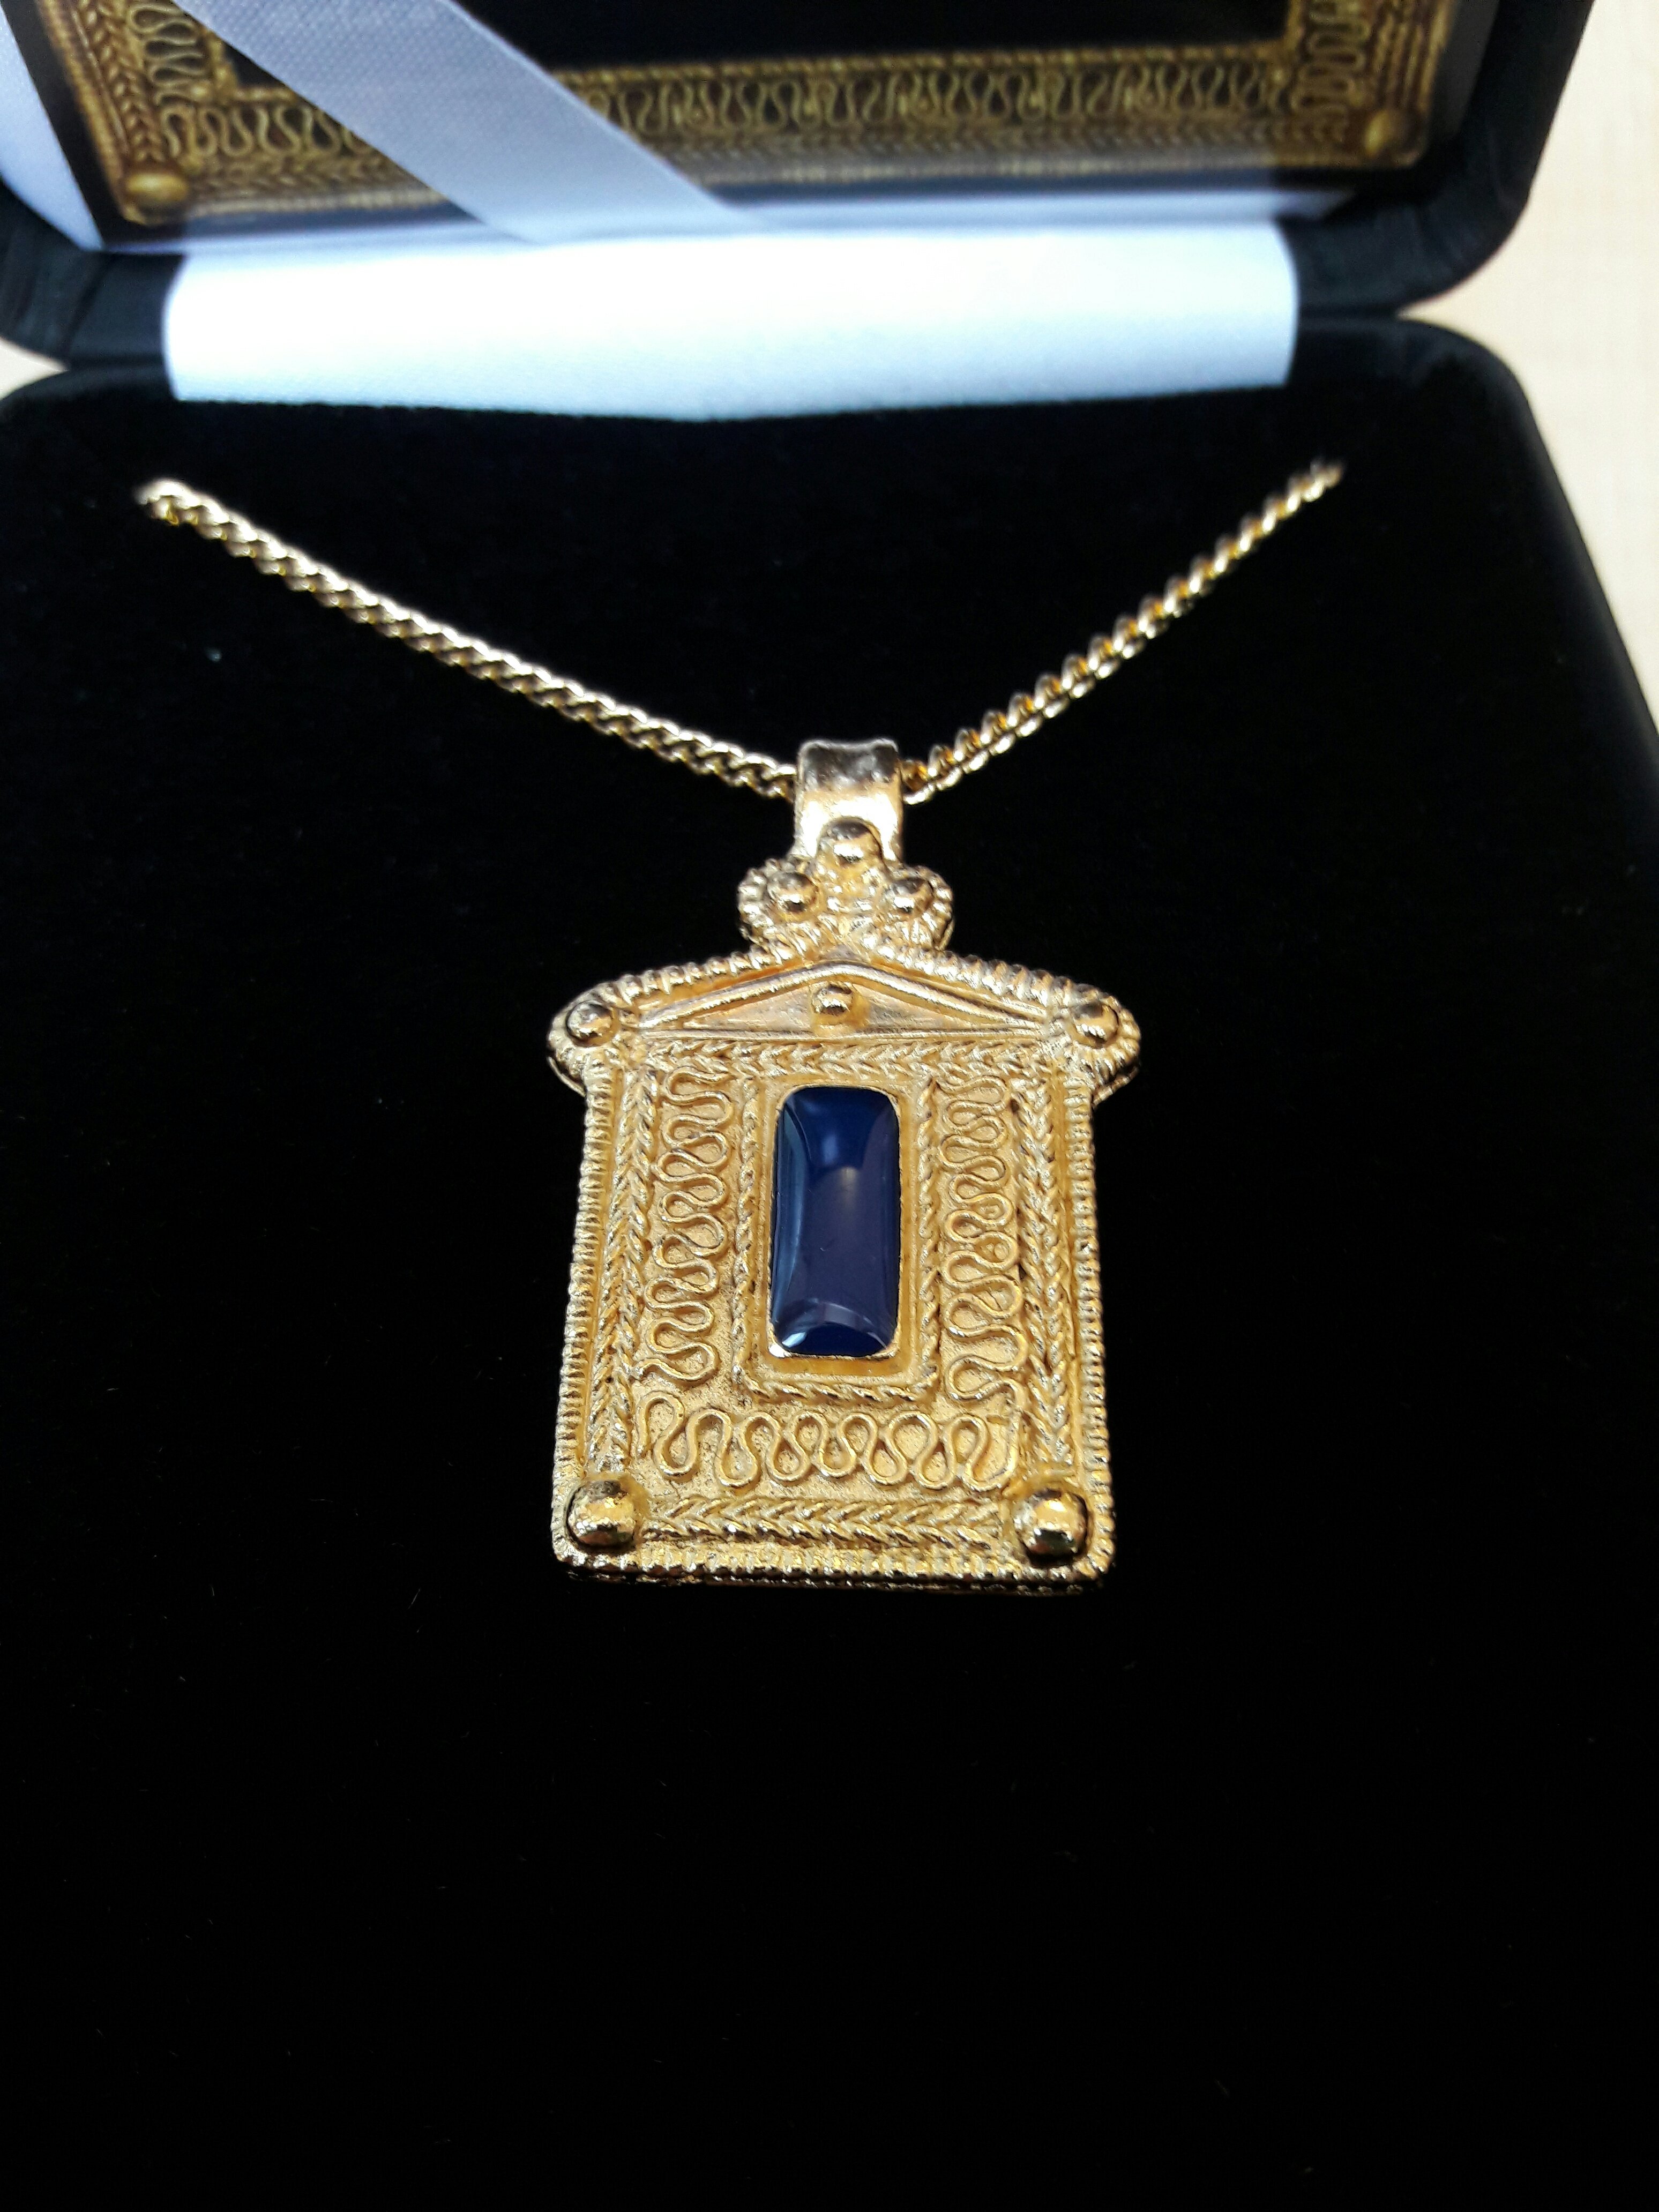 Photo of a reproduction Roman pendant, gold with a dark blue stone in the middle